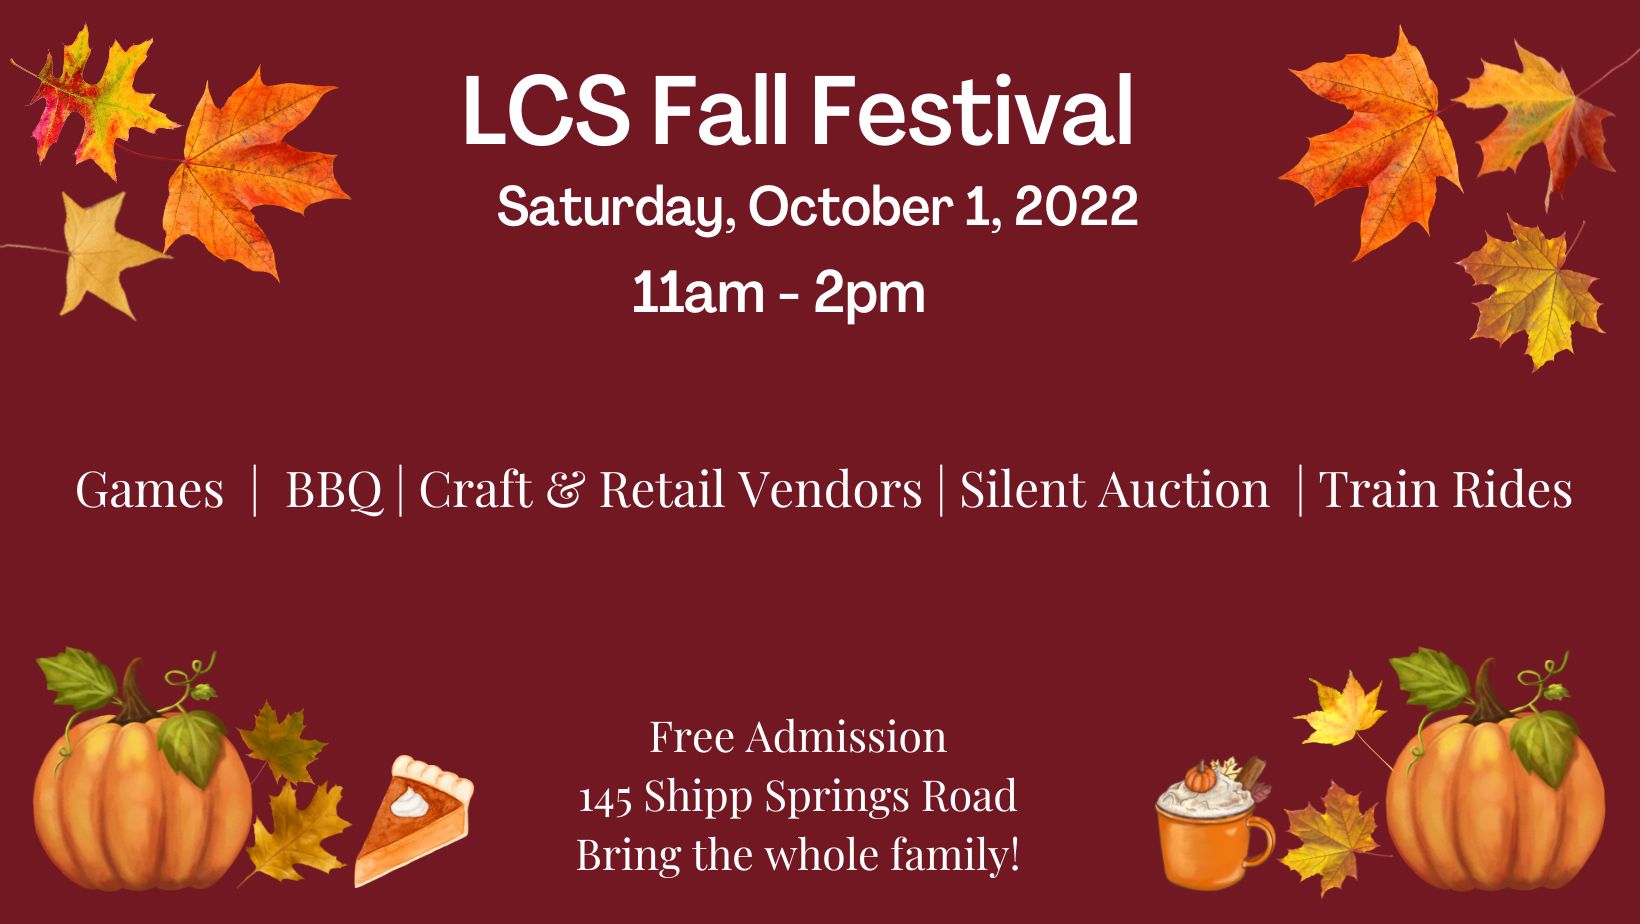 LCS Fall Festival, Kingsport, Tennessee, United States